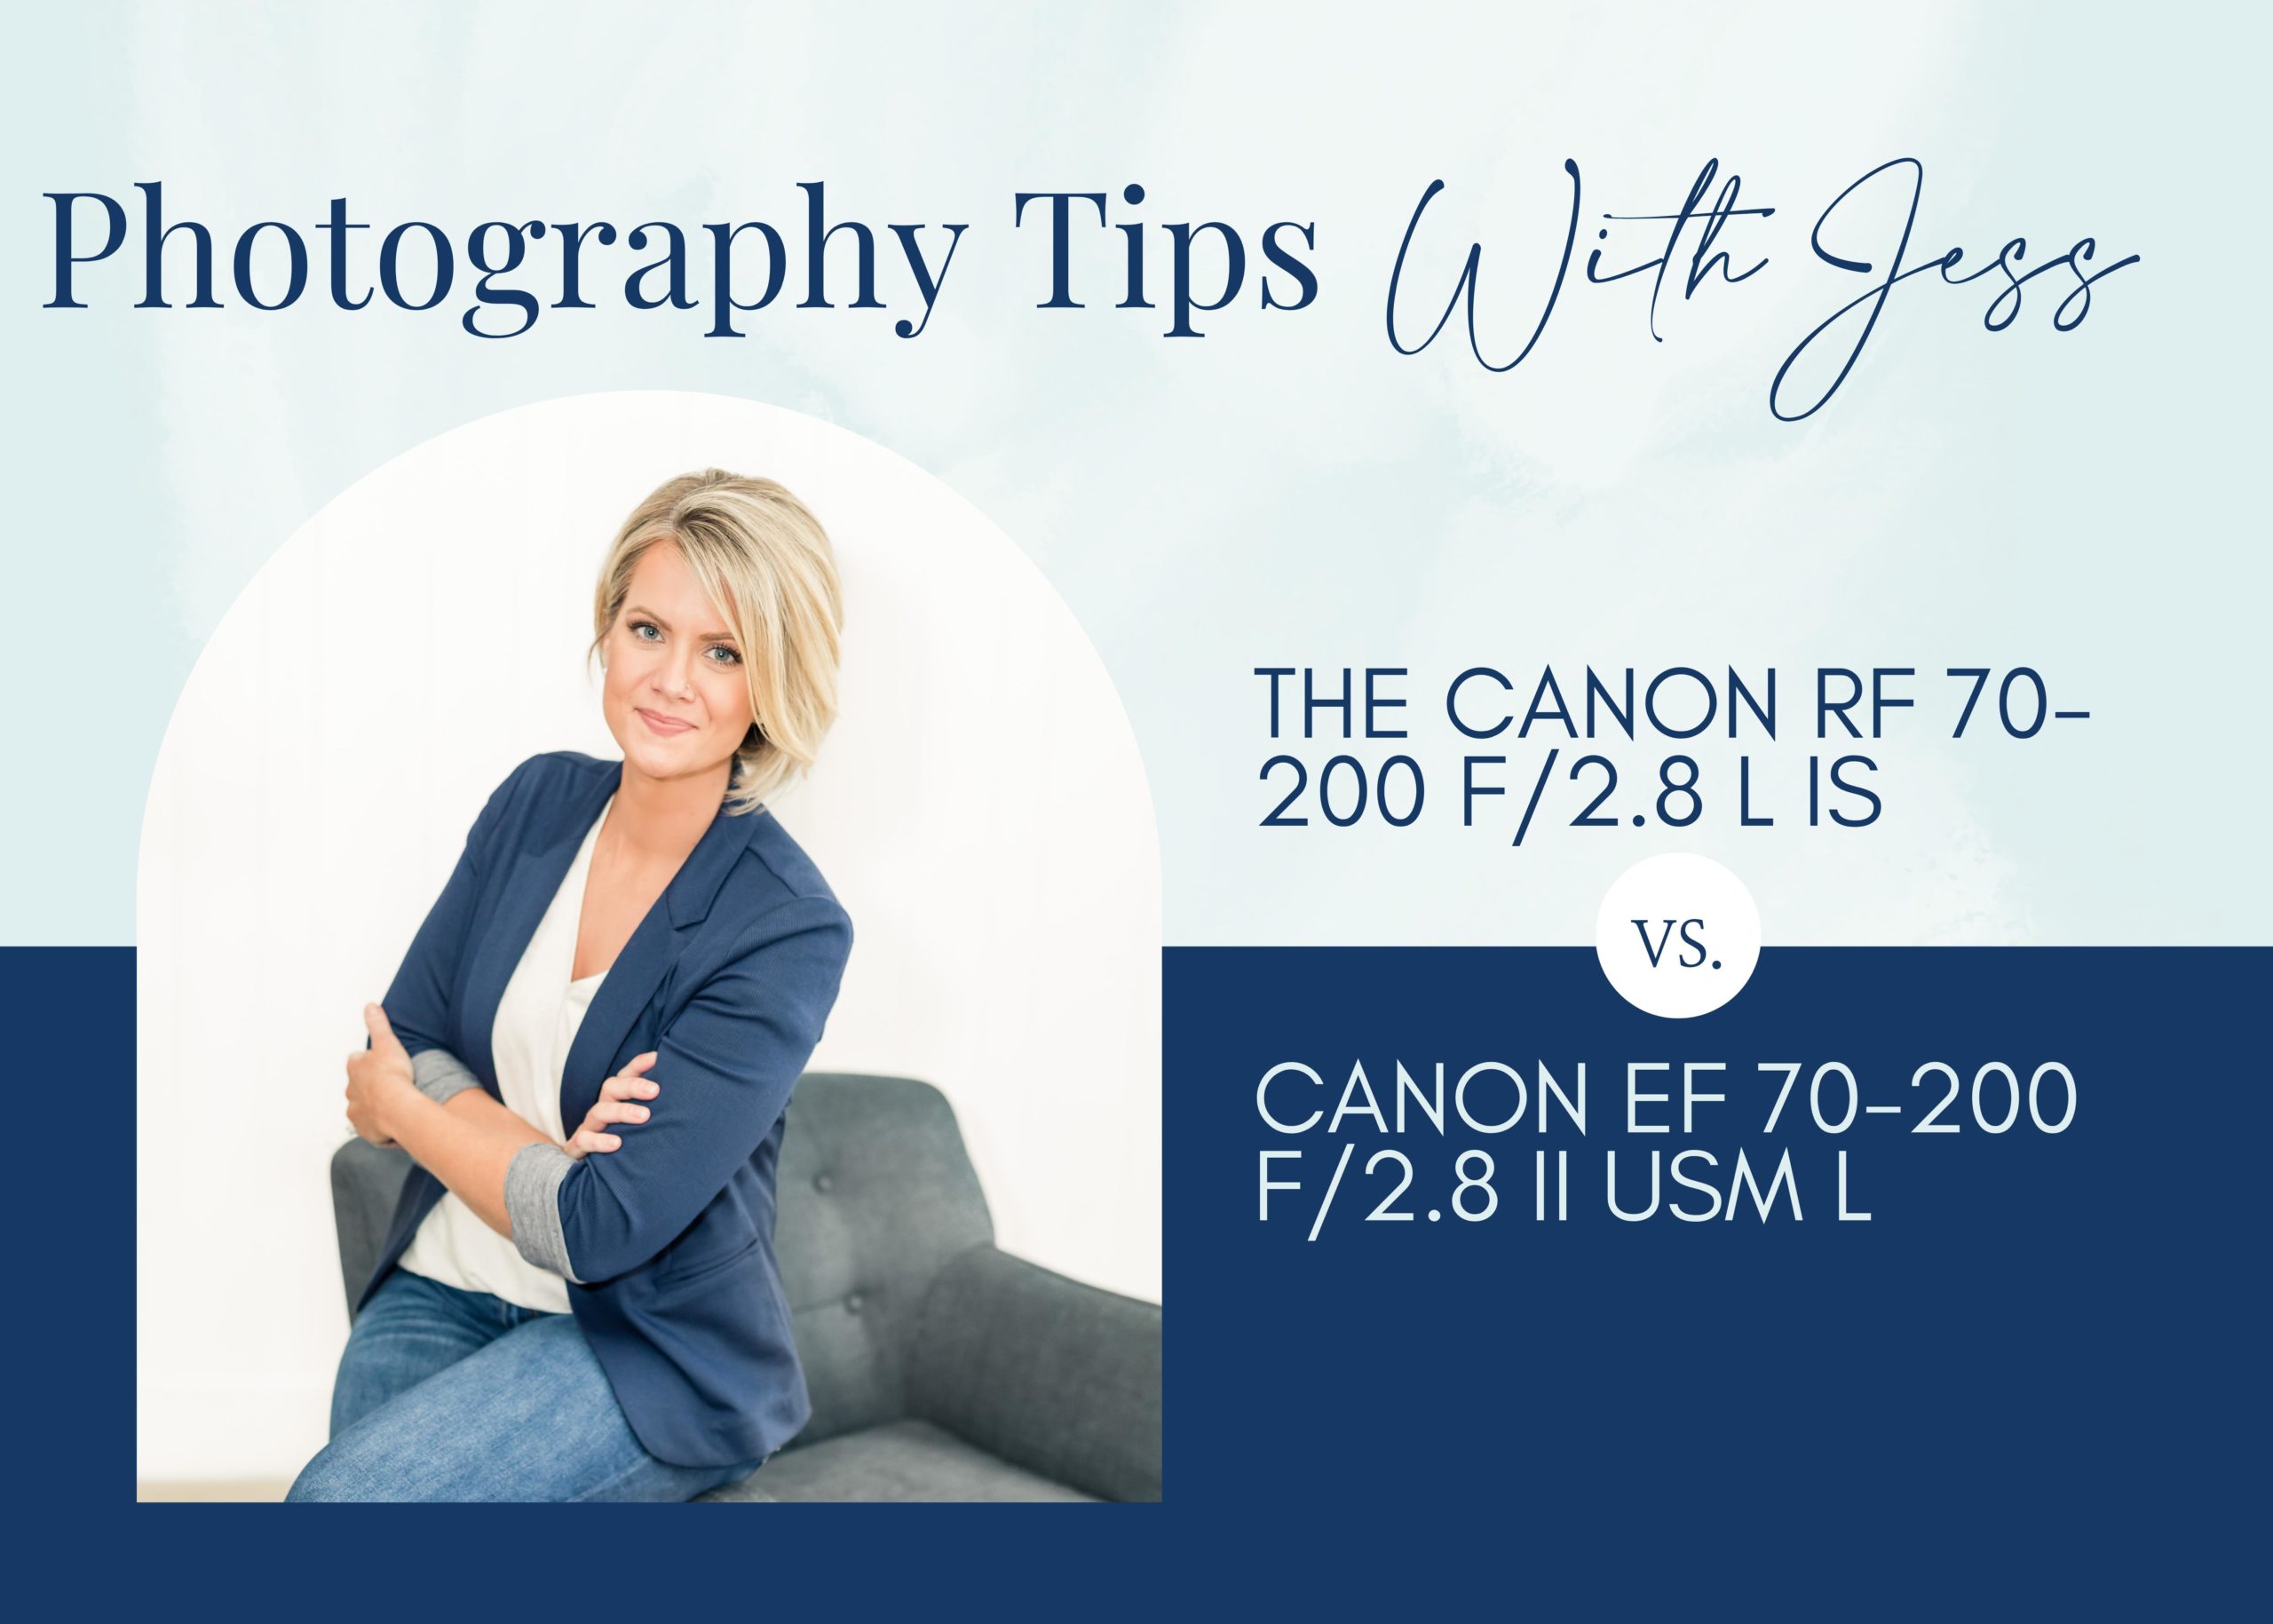 Photography Tips with Jess, Caon RF 70-200 F/2.8 L IS vs. Canon EF 70-200 F/2.8 II USM L